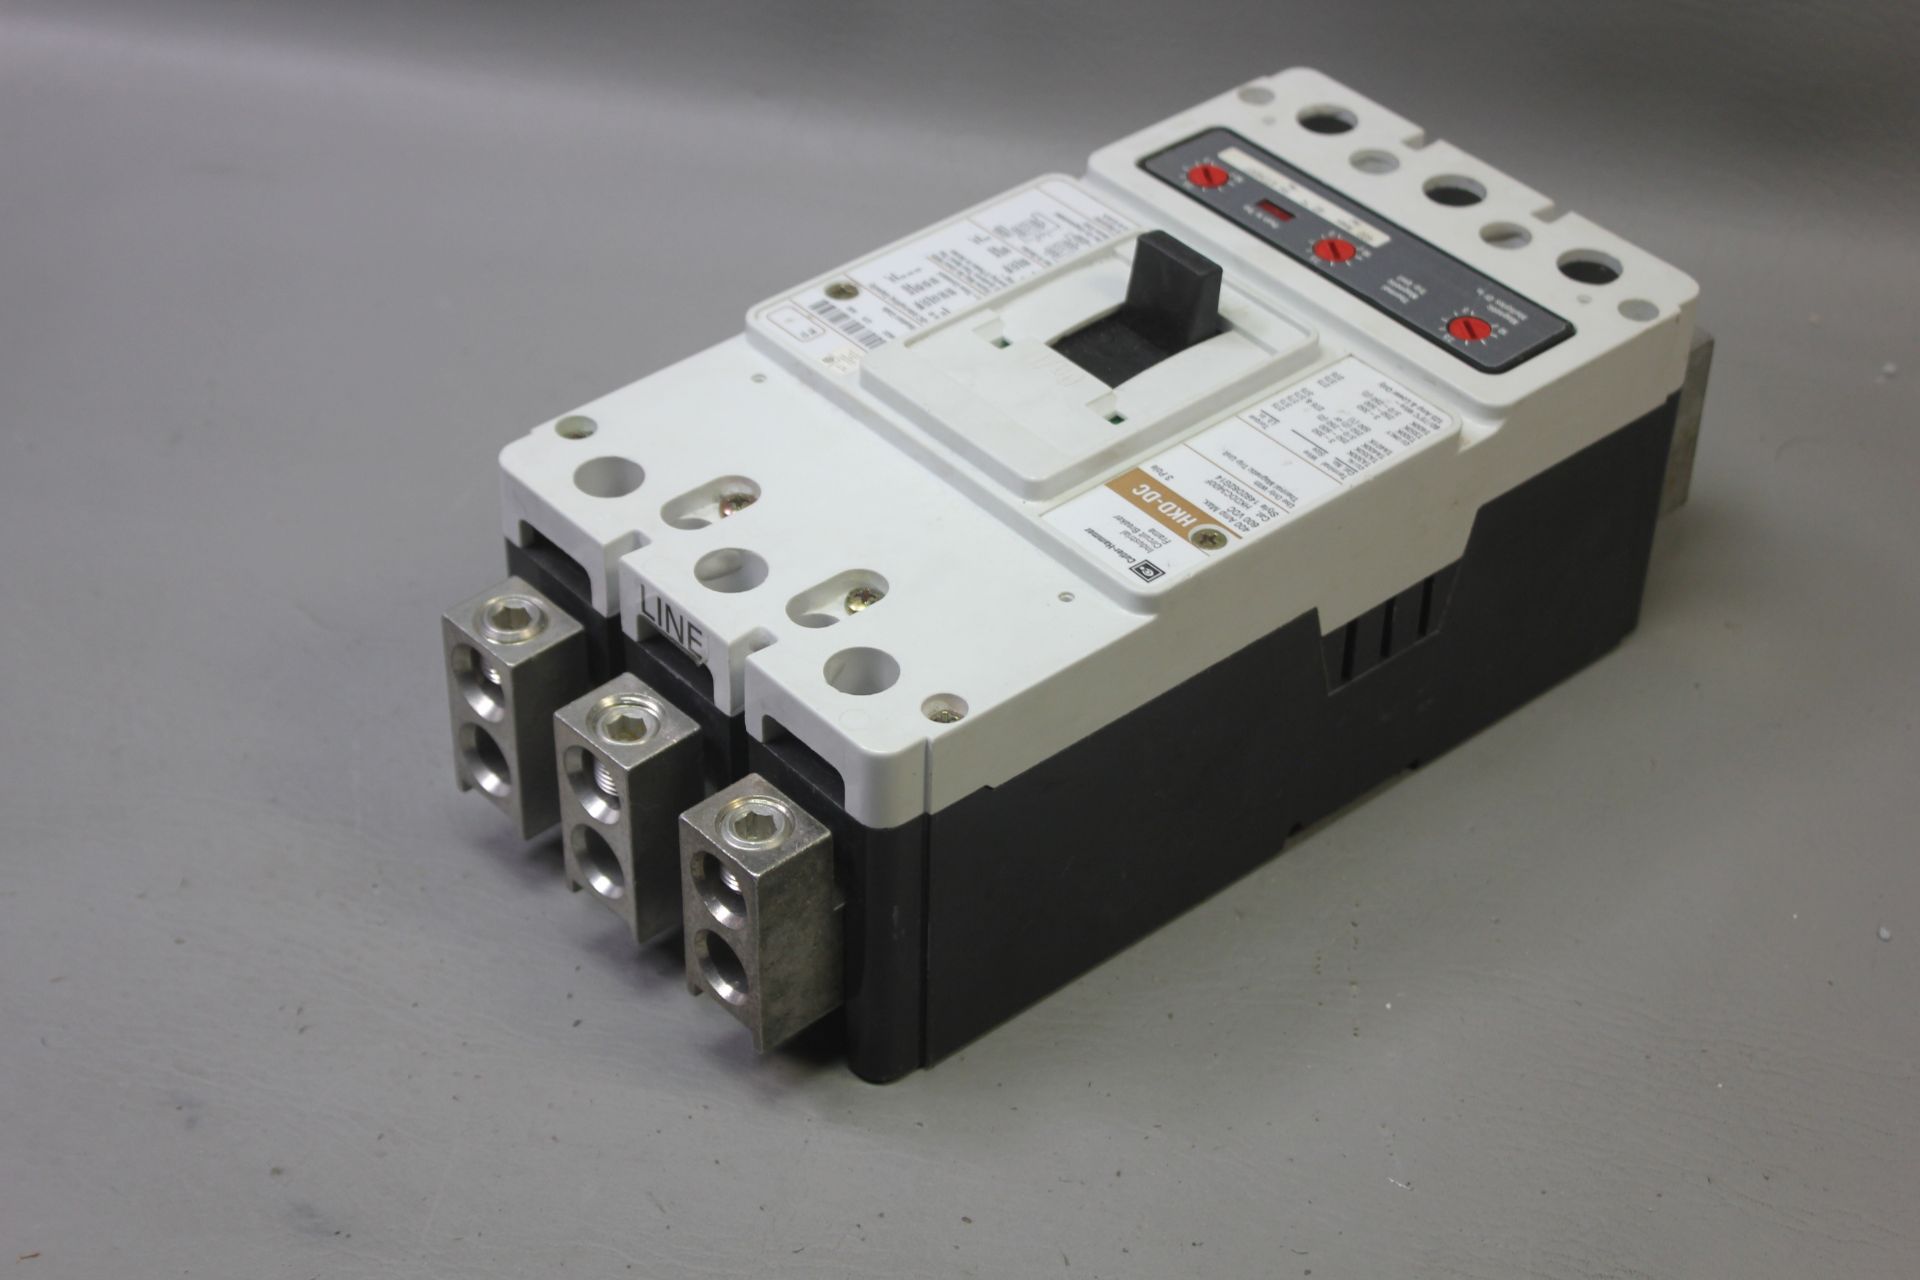 CUTLER HAMMER 400A INDUSTRIAL CIRCUIT BREAKER WITH TRIP UNIT - Image 3 of 7